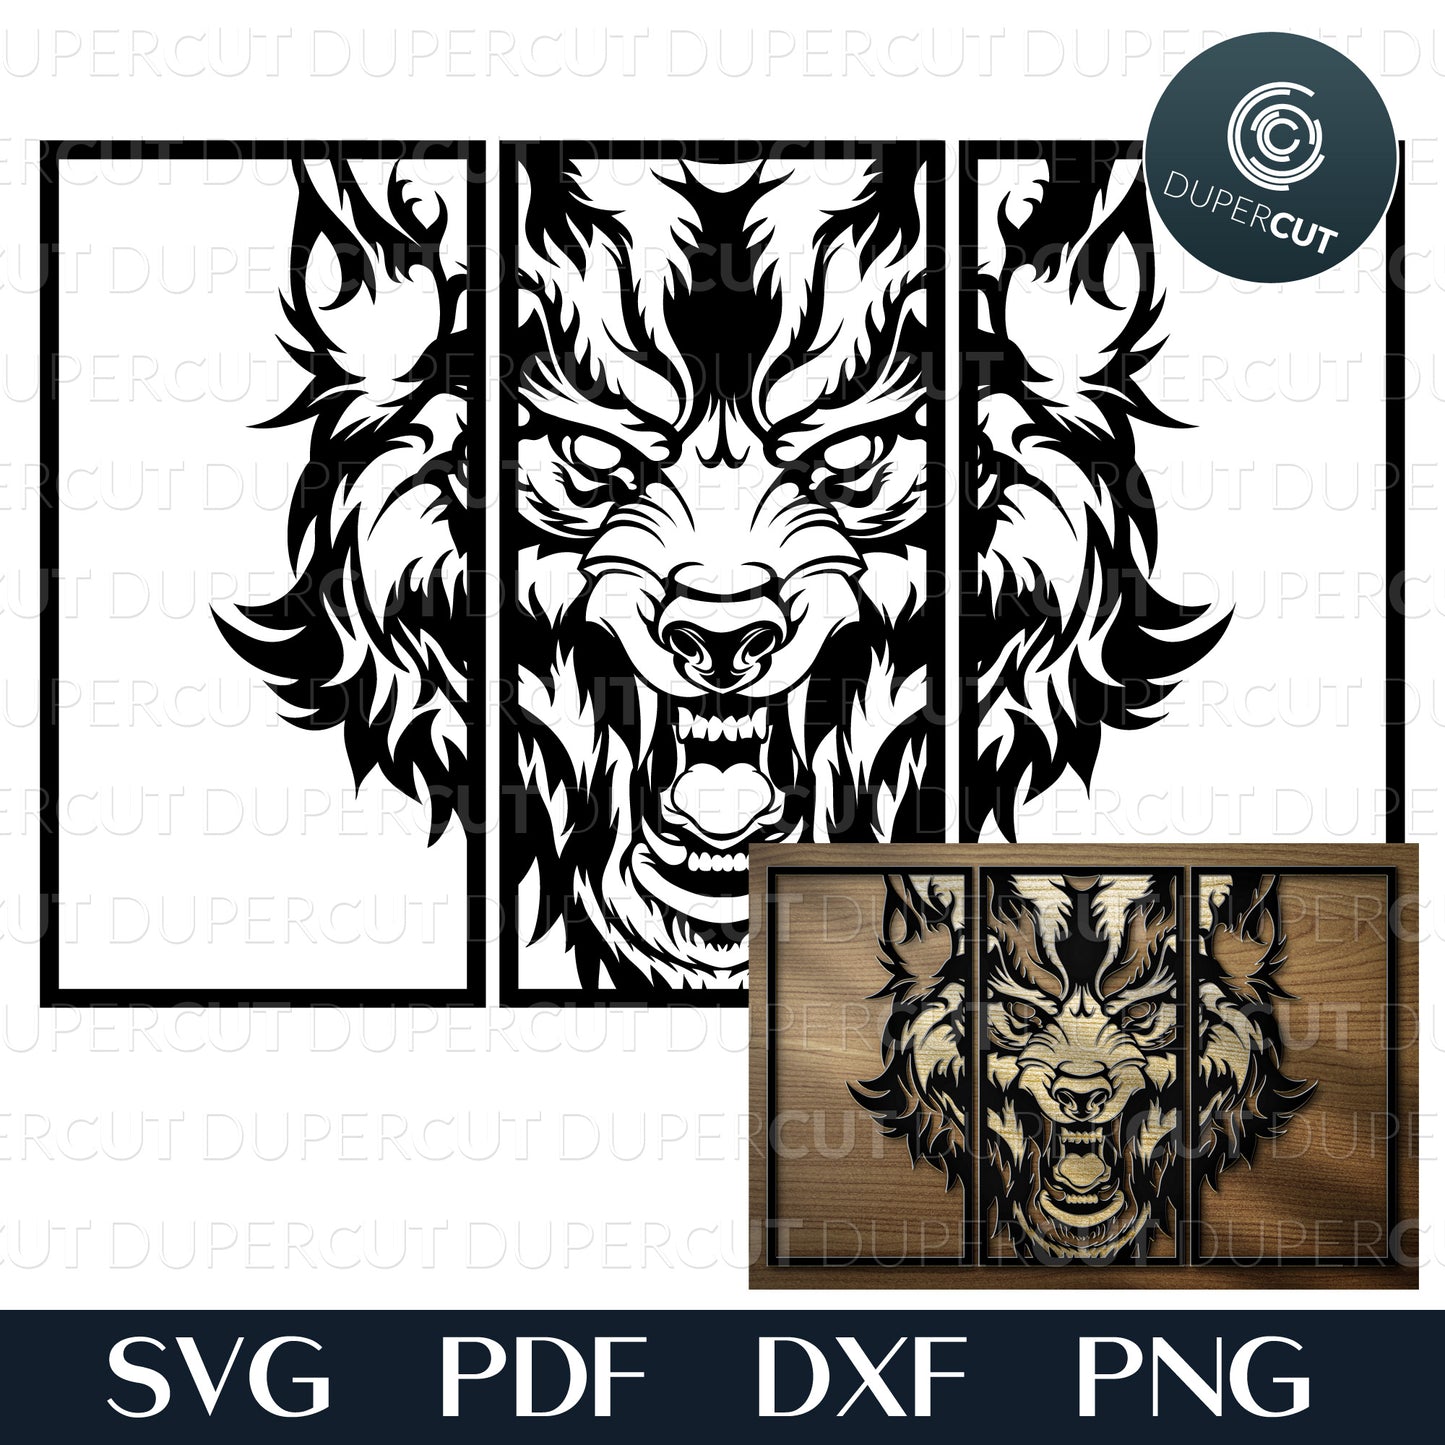 Wolf three panel wall art DIY layered wood laser cutting template - SVG DXF PDF files for Cricut, Glowforge, Silhouette Cameo, CNC Machines